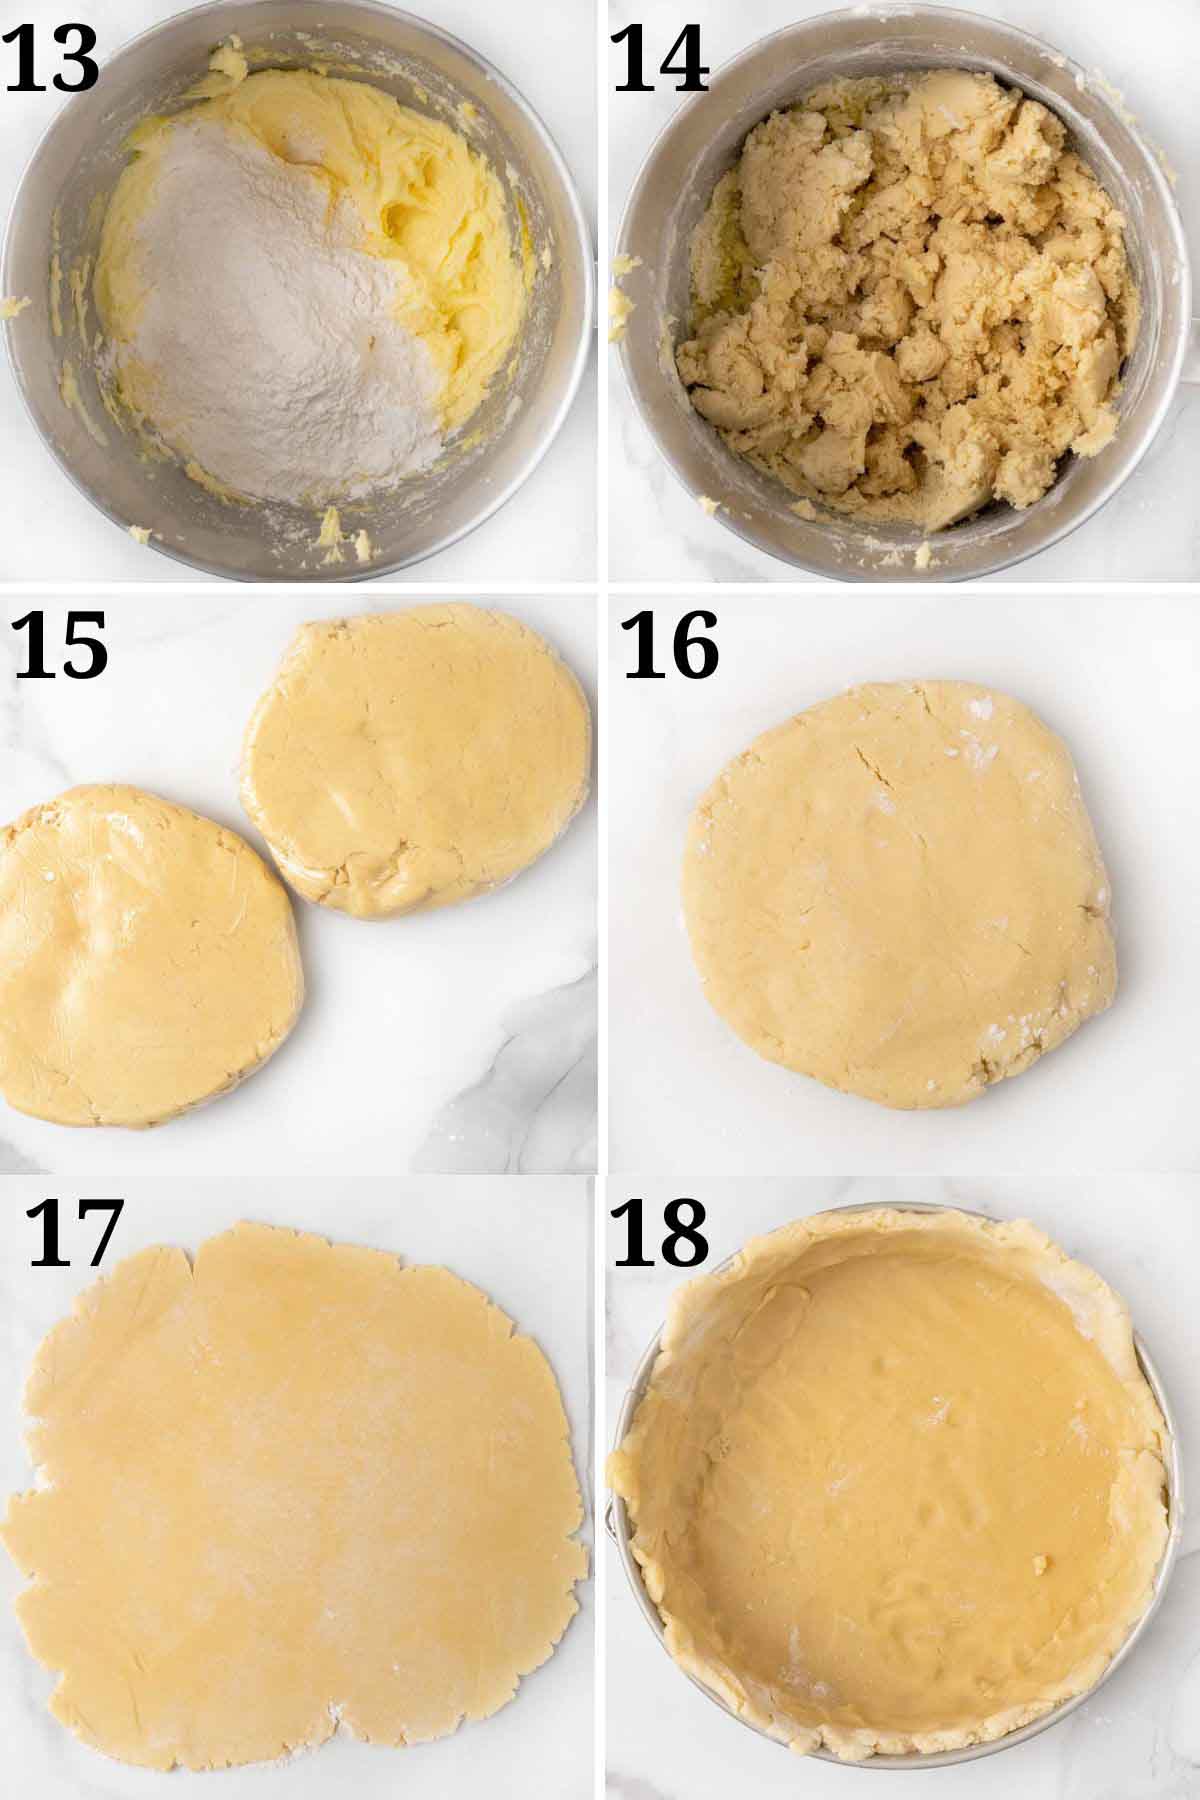 Collage showing how to finish making dough and setting it up in the pan.